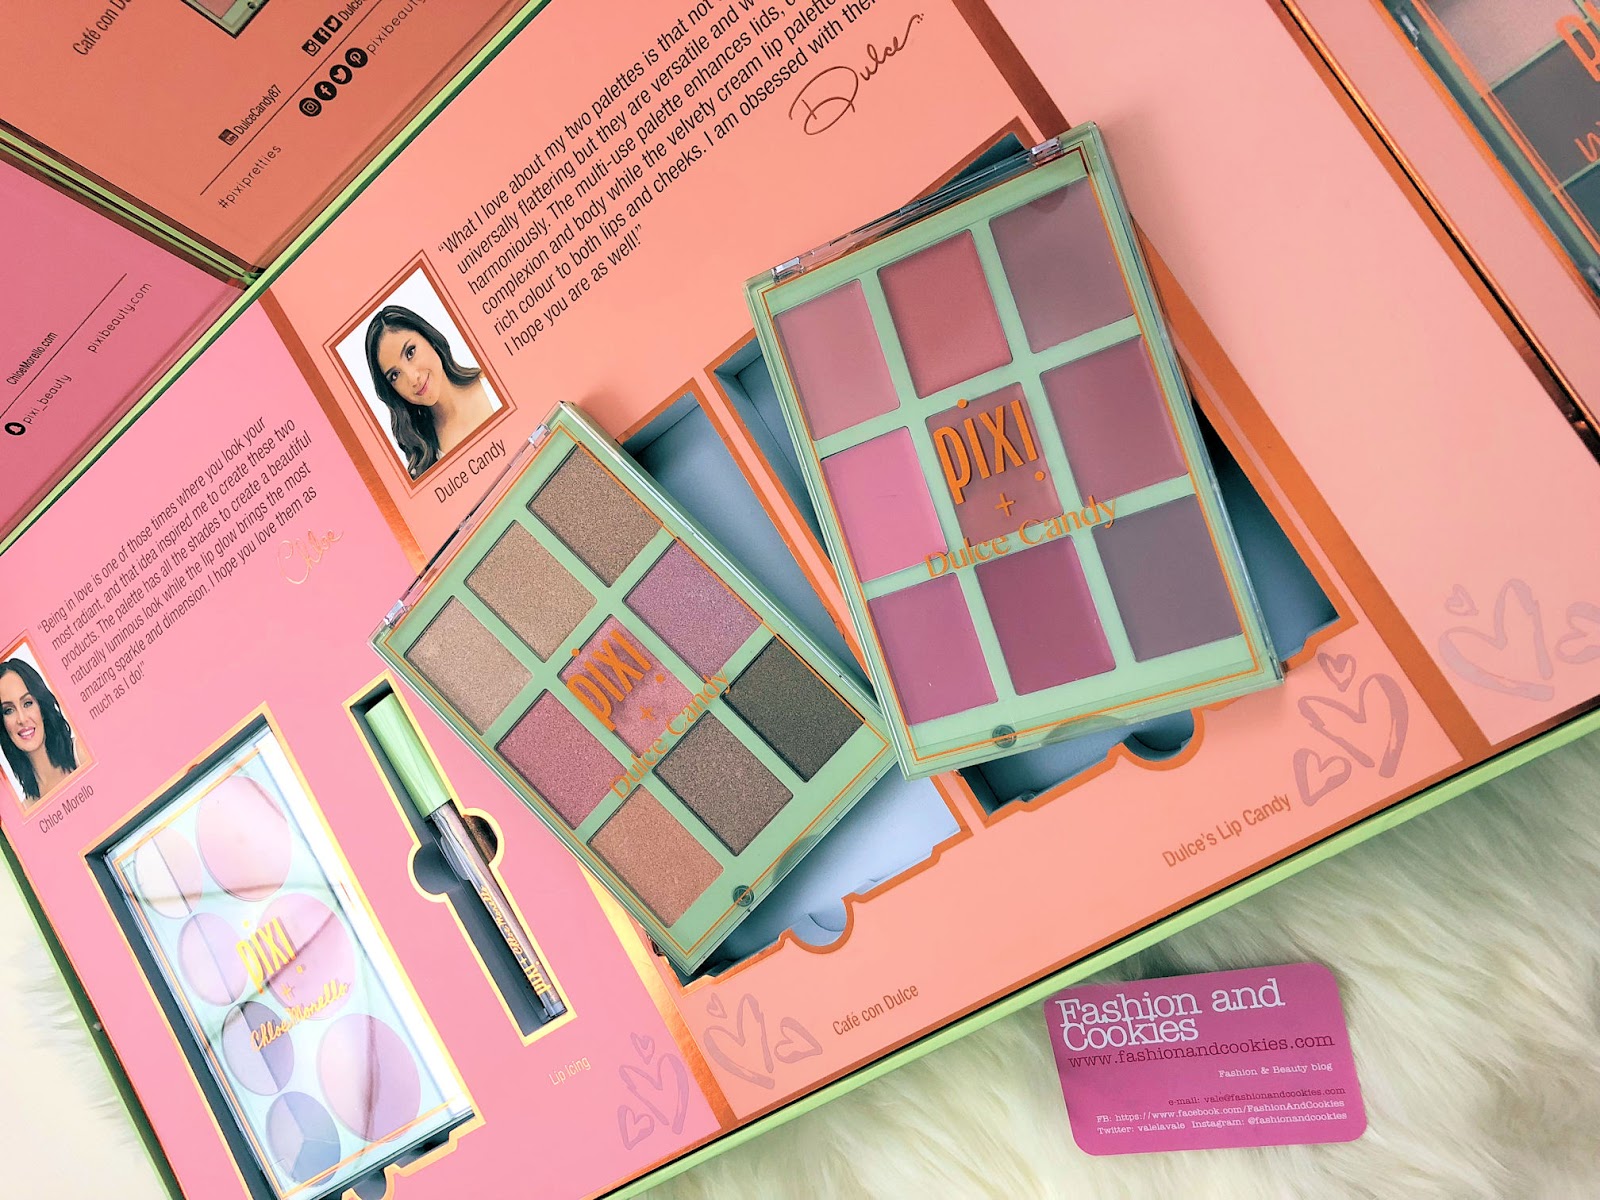 PIXI Beauty Spring 2018 makeup collection: Pixi Pretties on Fashion and Cookies beauty blog, beauty blogger